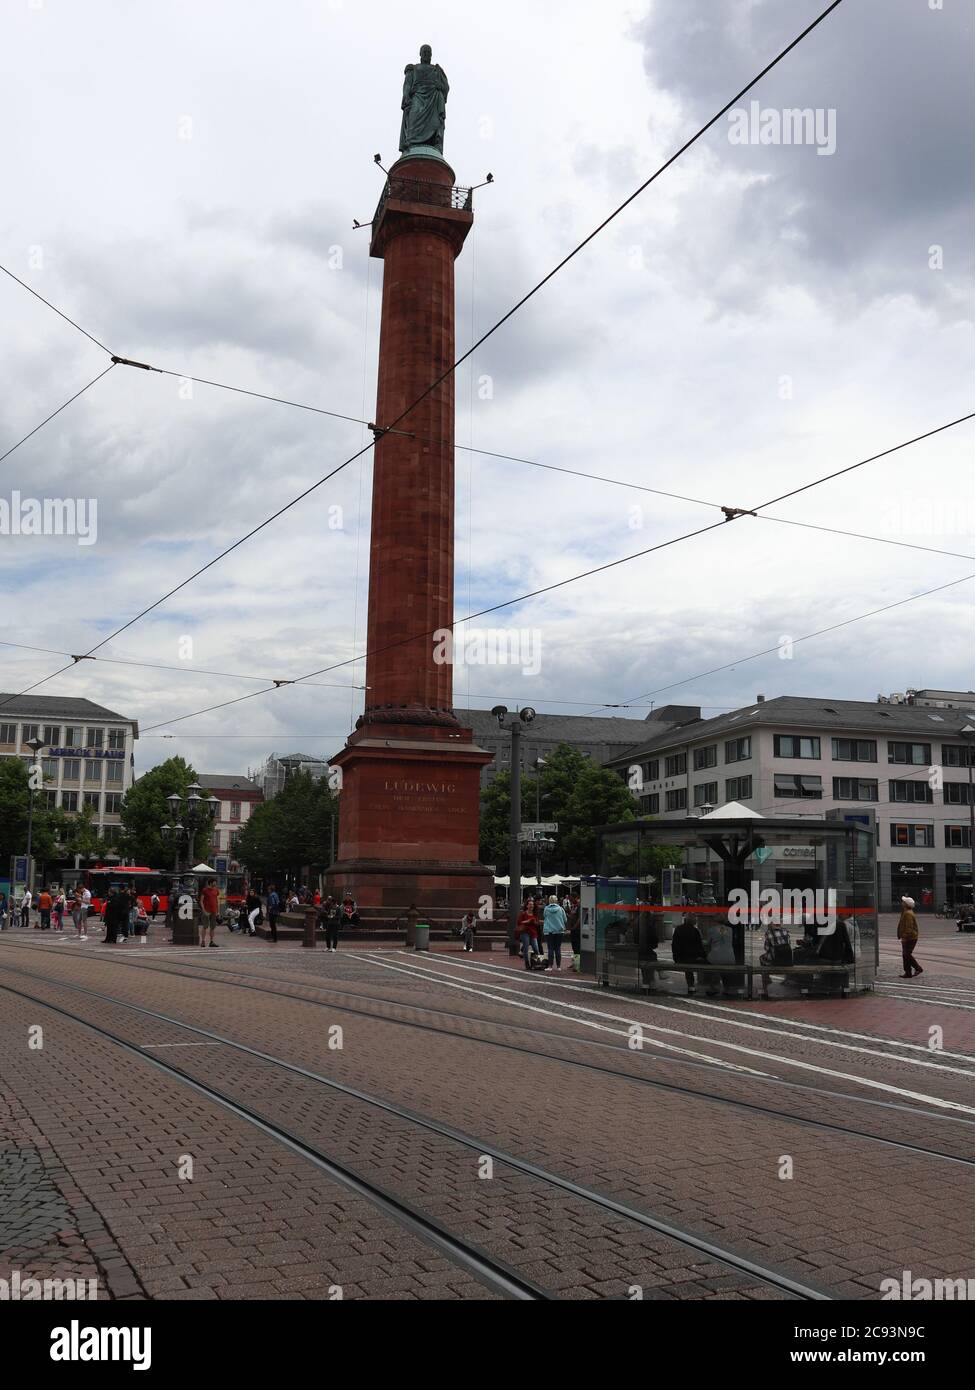 Darmstadt, Hessen/ Germany - May 30 2019: Ludwigsmonument - statue built in remembrance to Ludwig I. Stock Photo